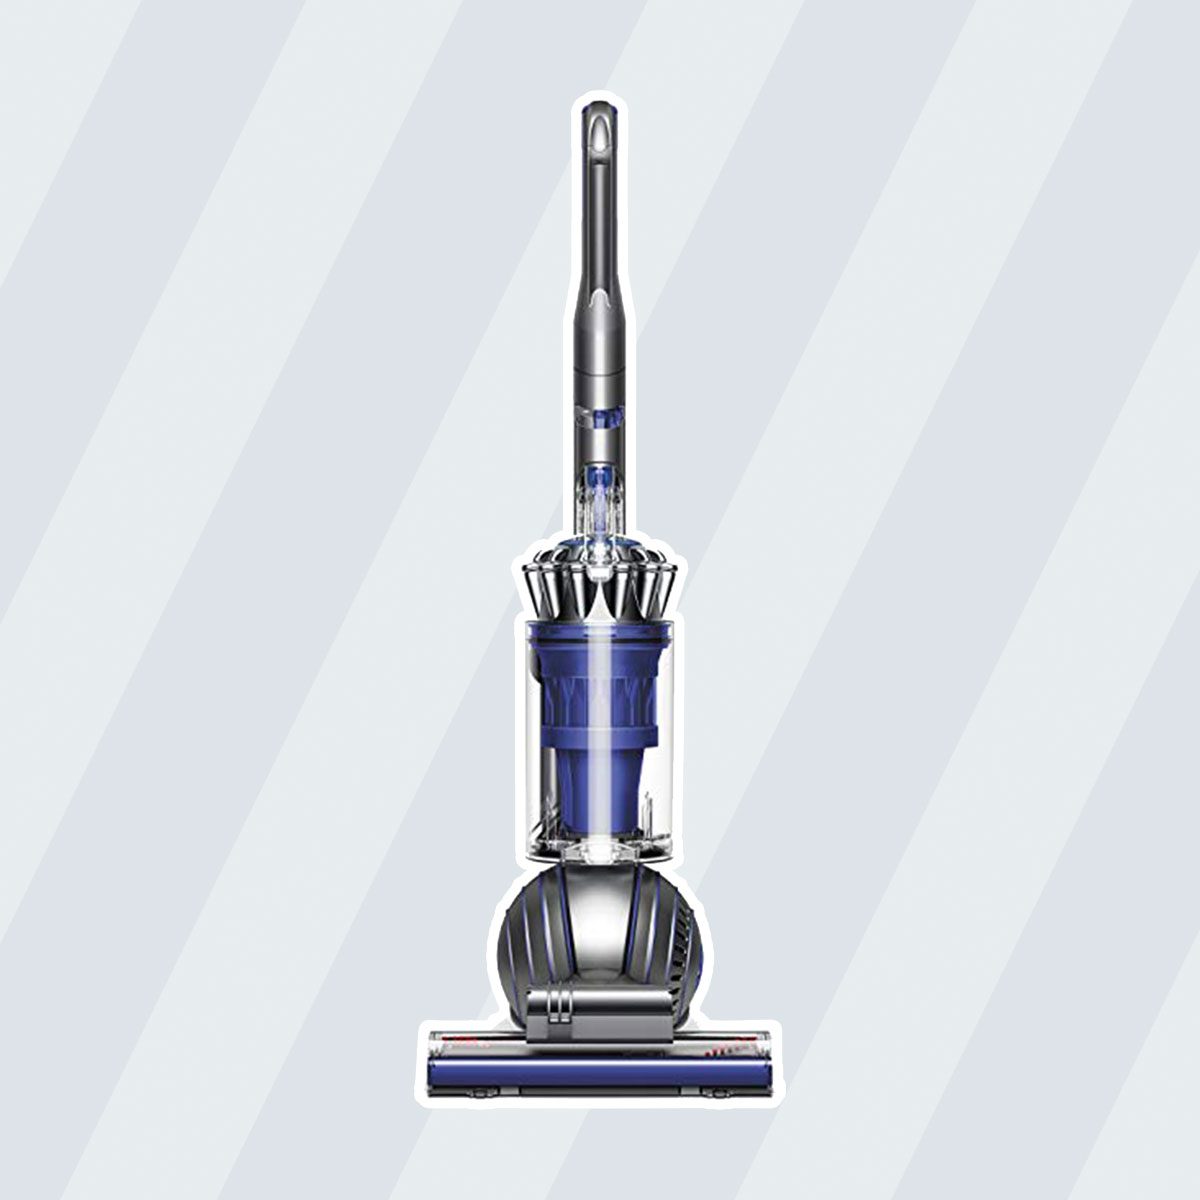 Dyson Ball Animal 2 Total Clean Upright Vacuum